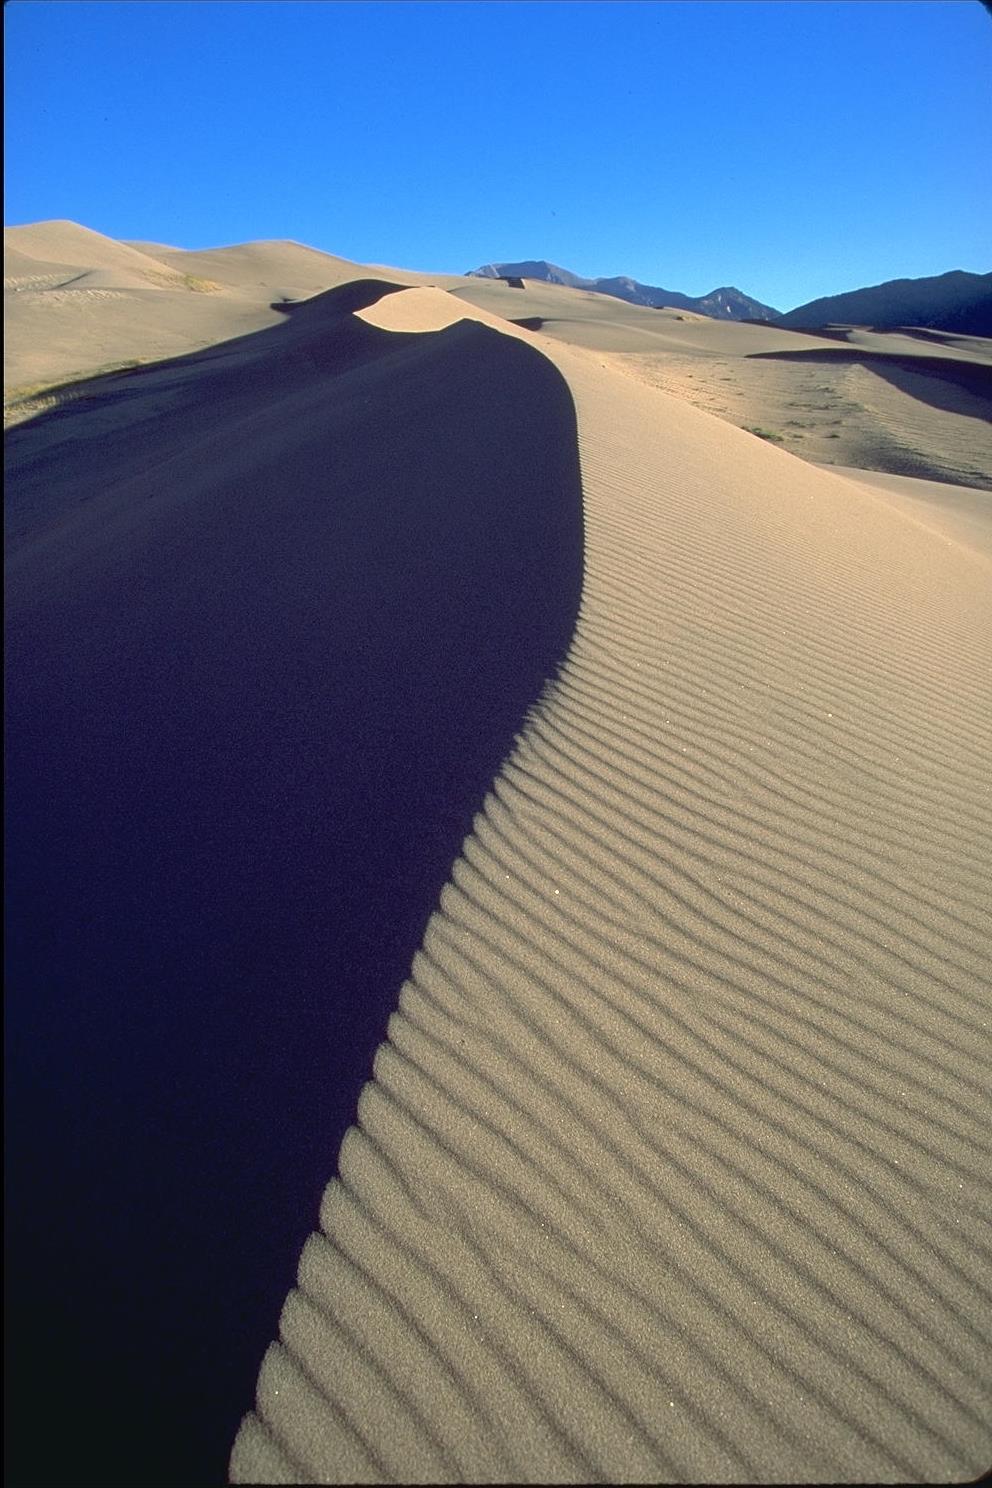 Transverse dunes Straight-crested or sinuous ridges (aklé dunes), oriented perpendicular to wind direction Length < 100 km, height < 100-200 m,